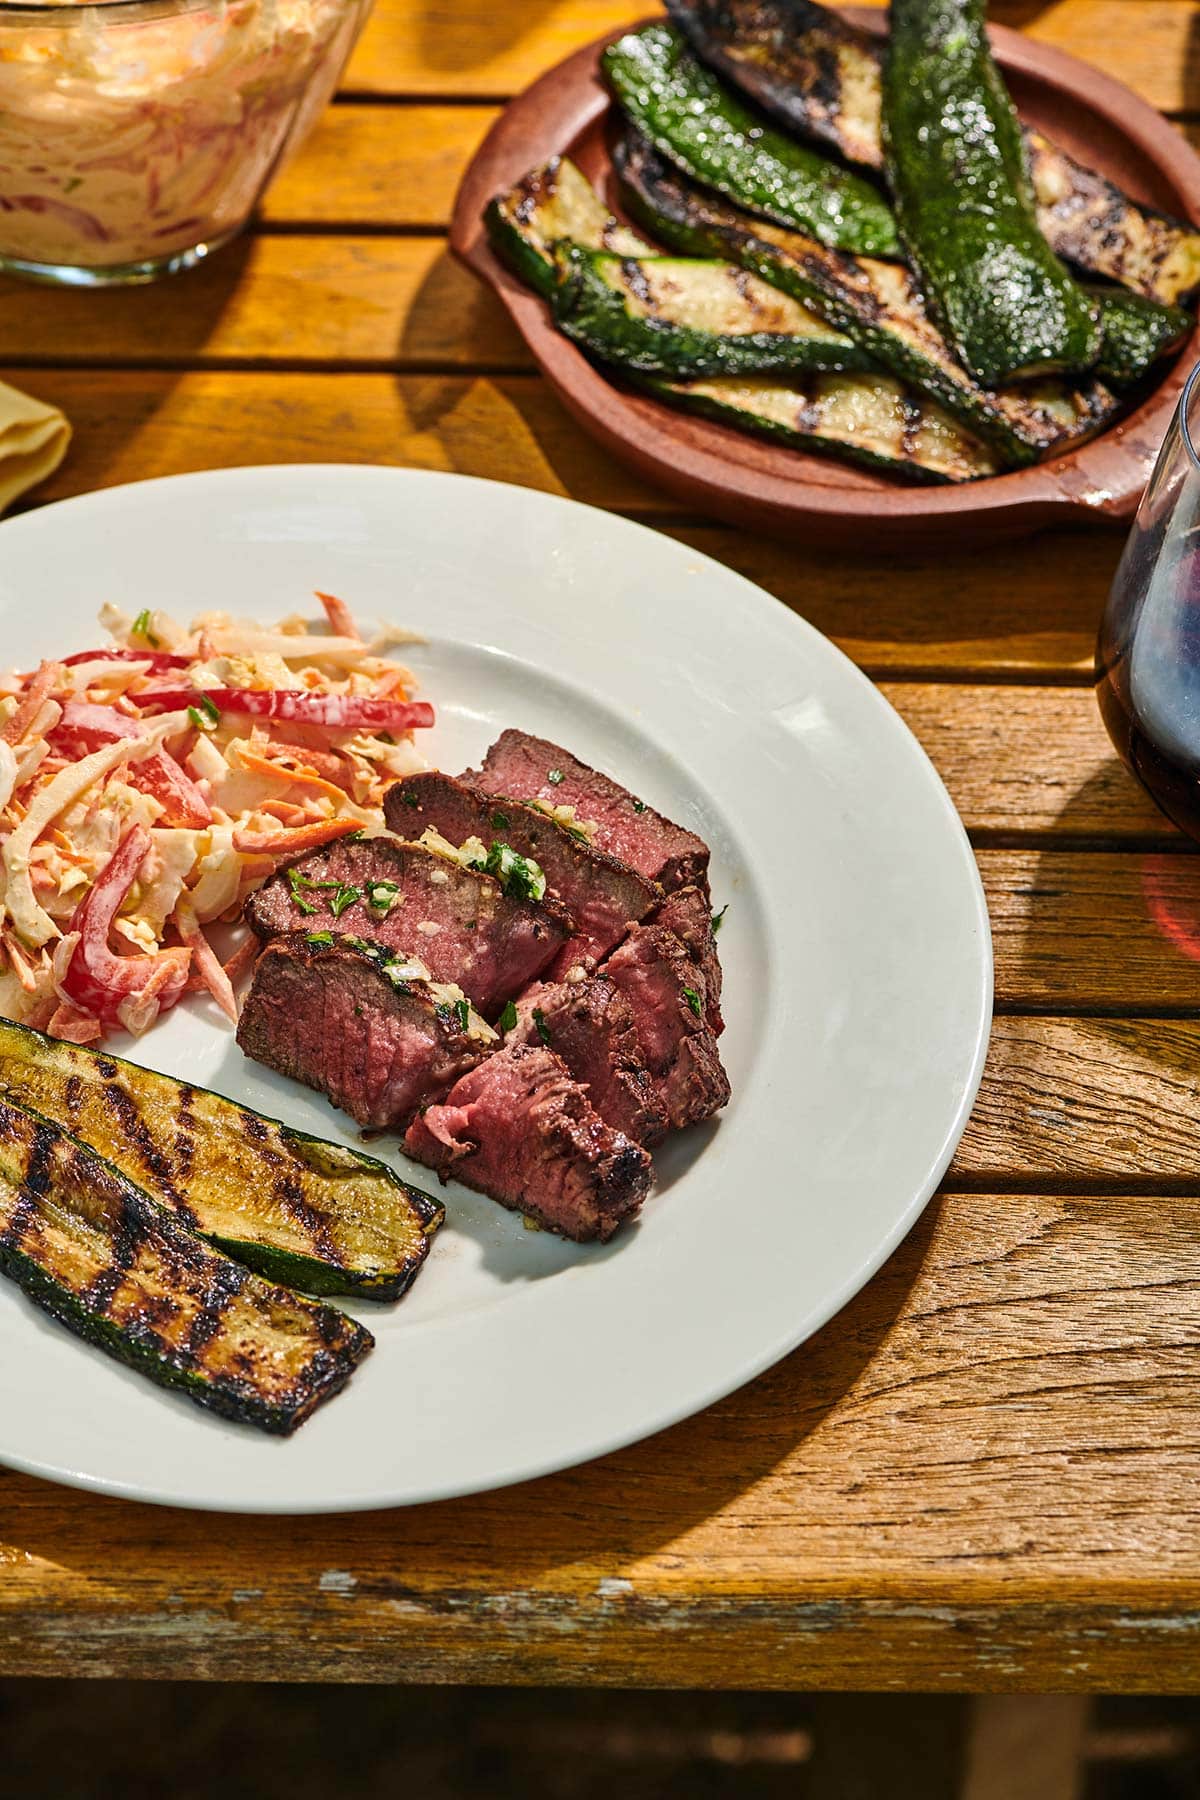 Slices of grilled filet mignon on picnic table with sides of grilled eggplant, cole slaw, and other sides.